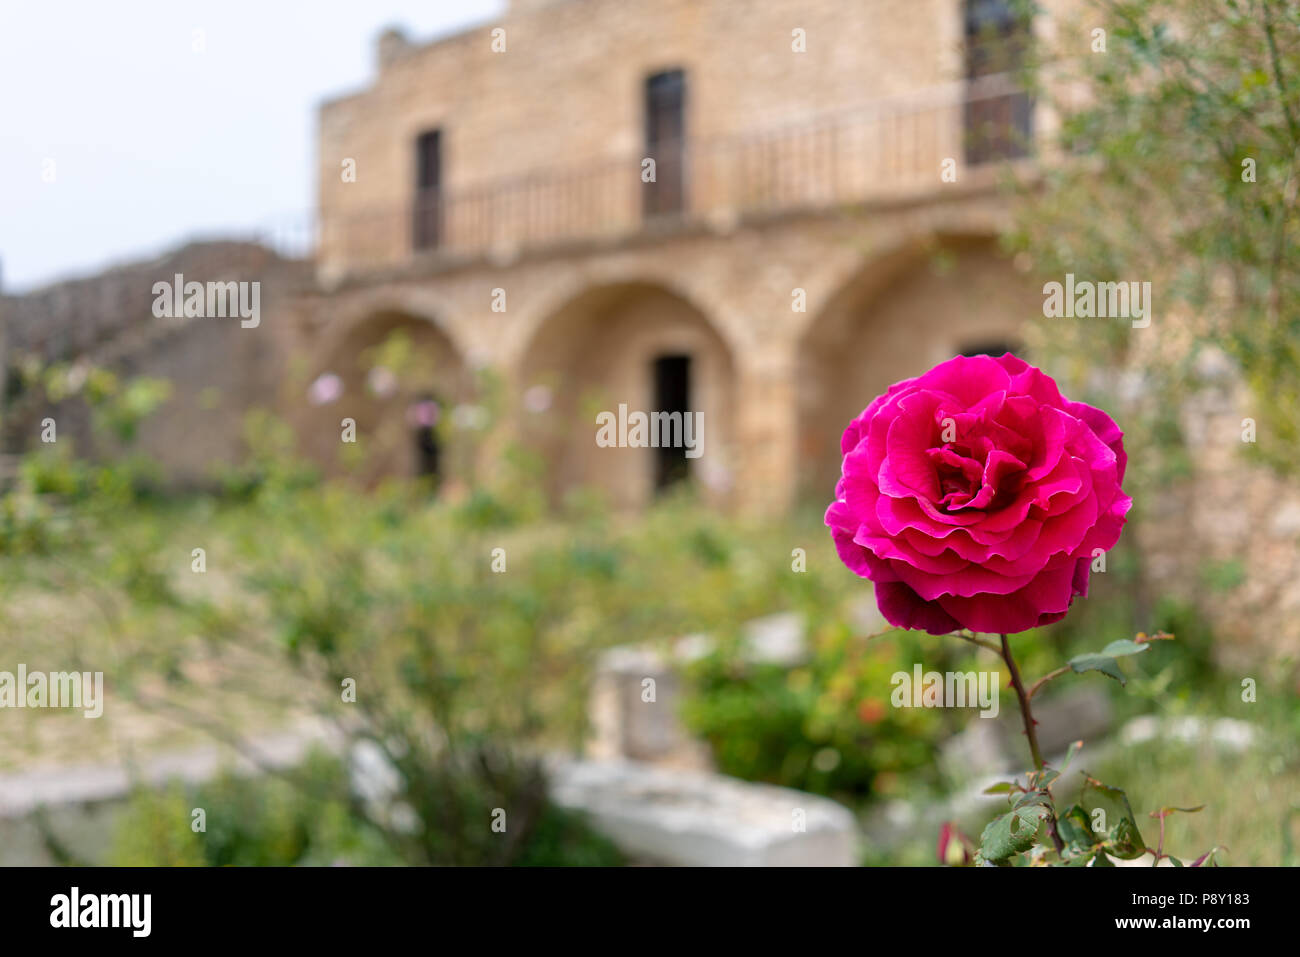 Cretan Rose High Resolution Stock Photography and Images - Alamy